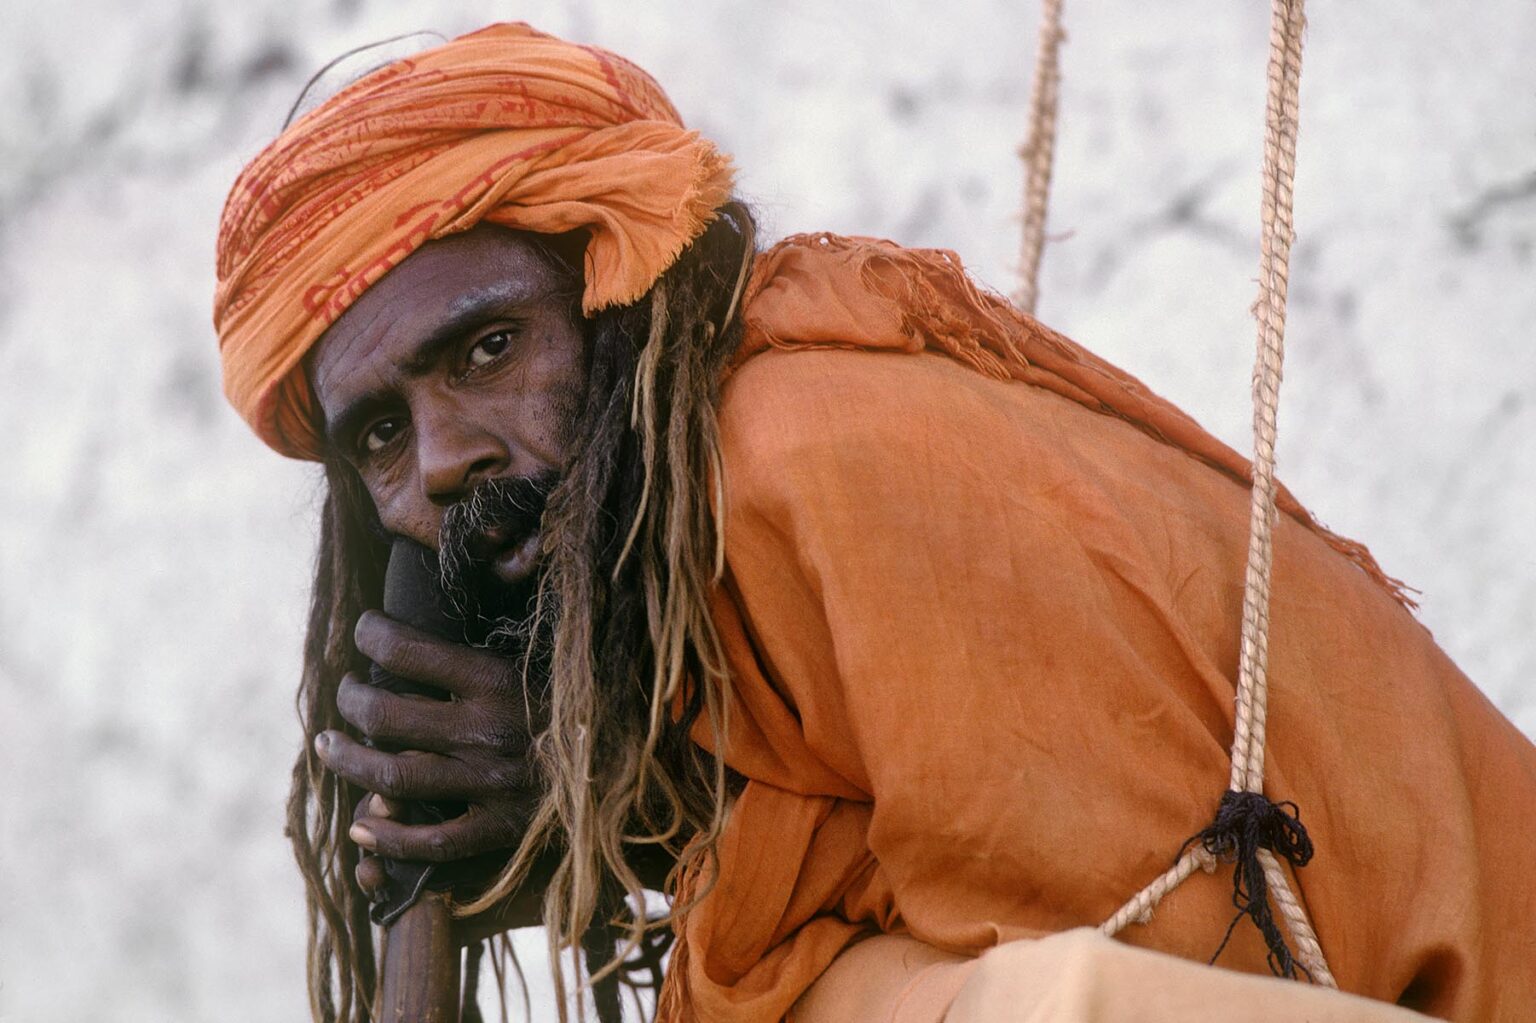 HINDU SADDHU in SWING with renunciate's vow to never lay on the ground at the PUSHKAR CAMEL FAIR - RAJASTHAN, INDIA